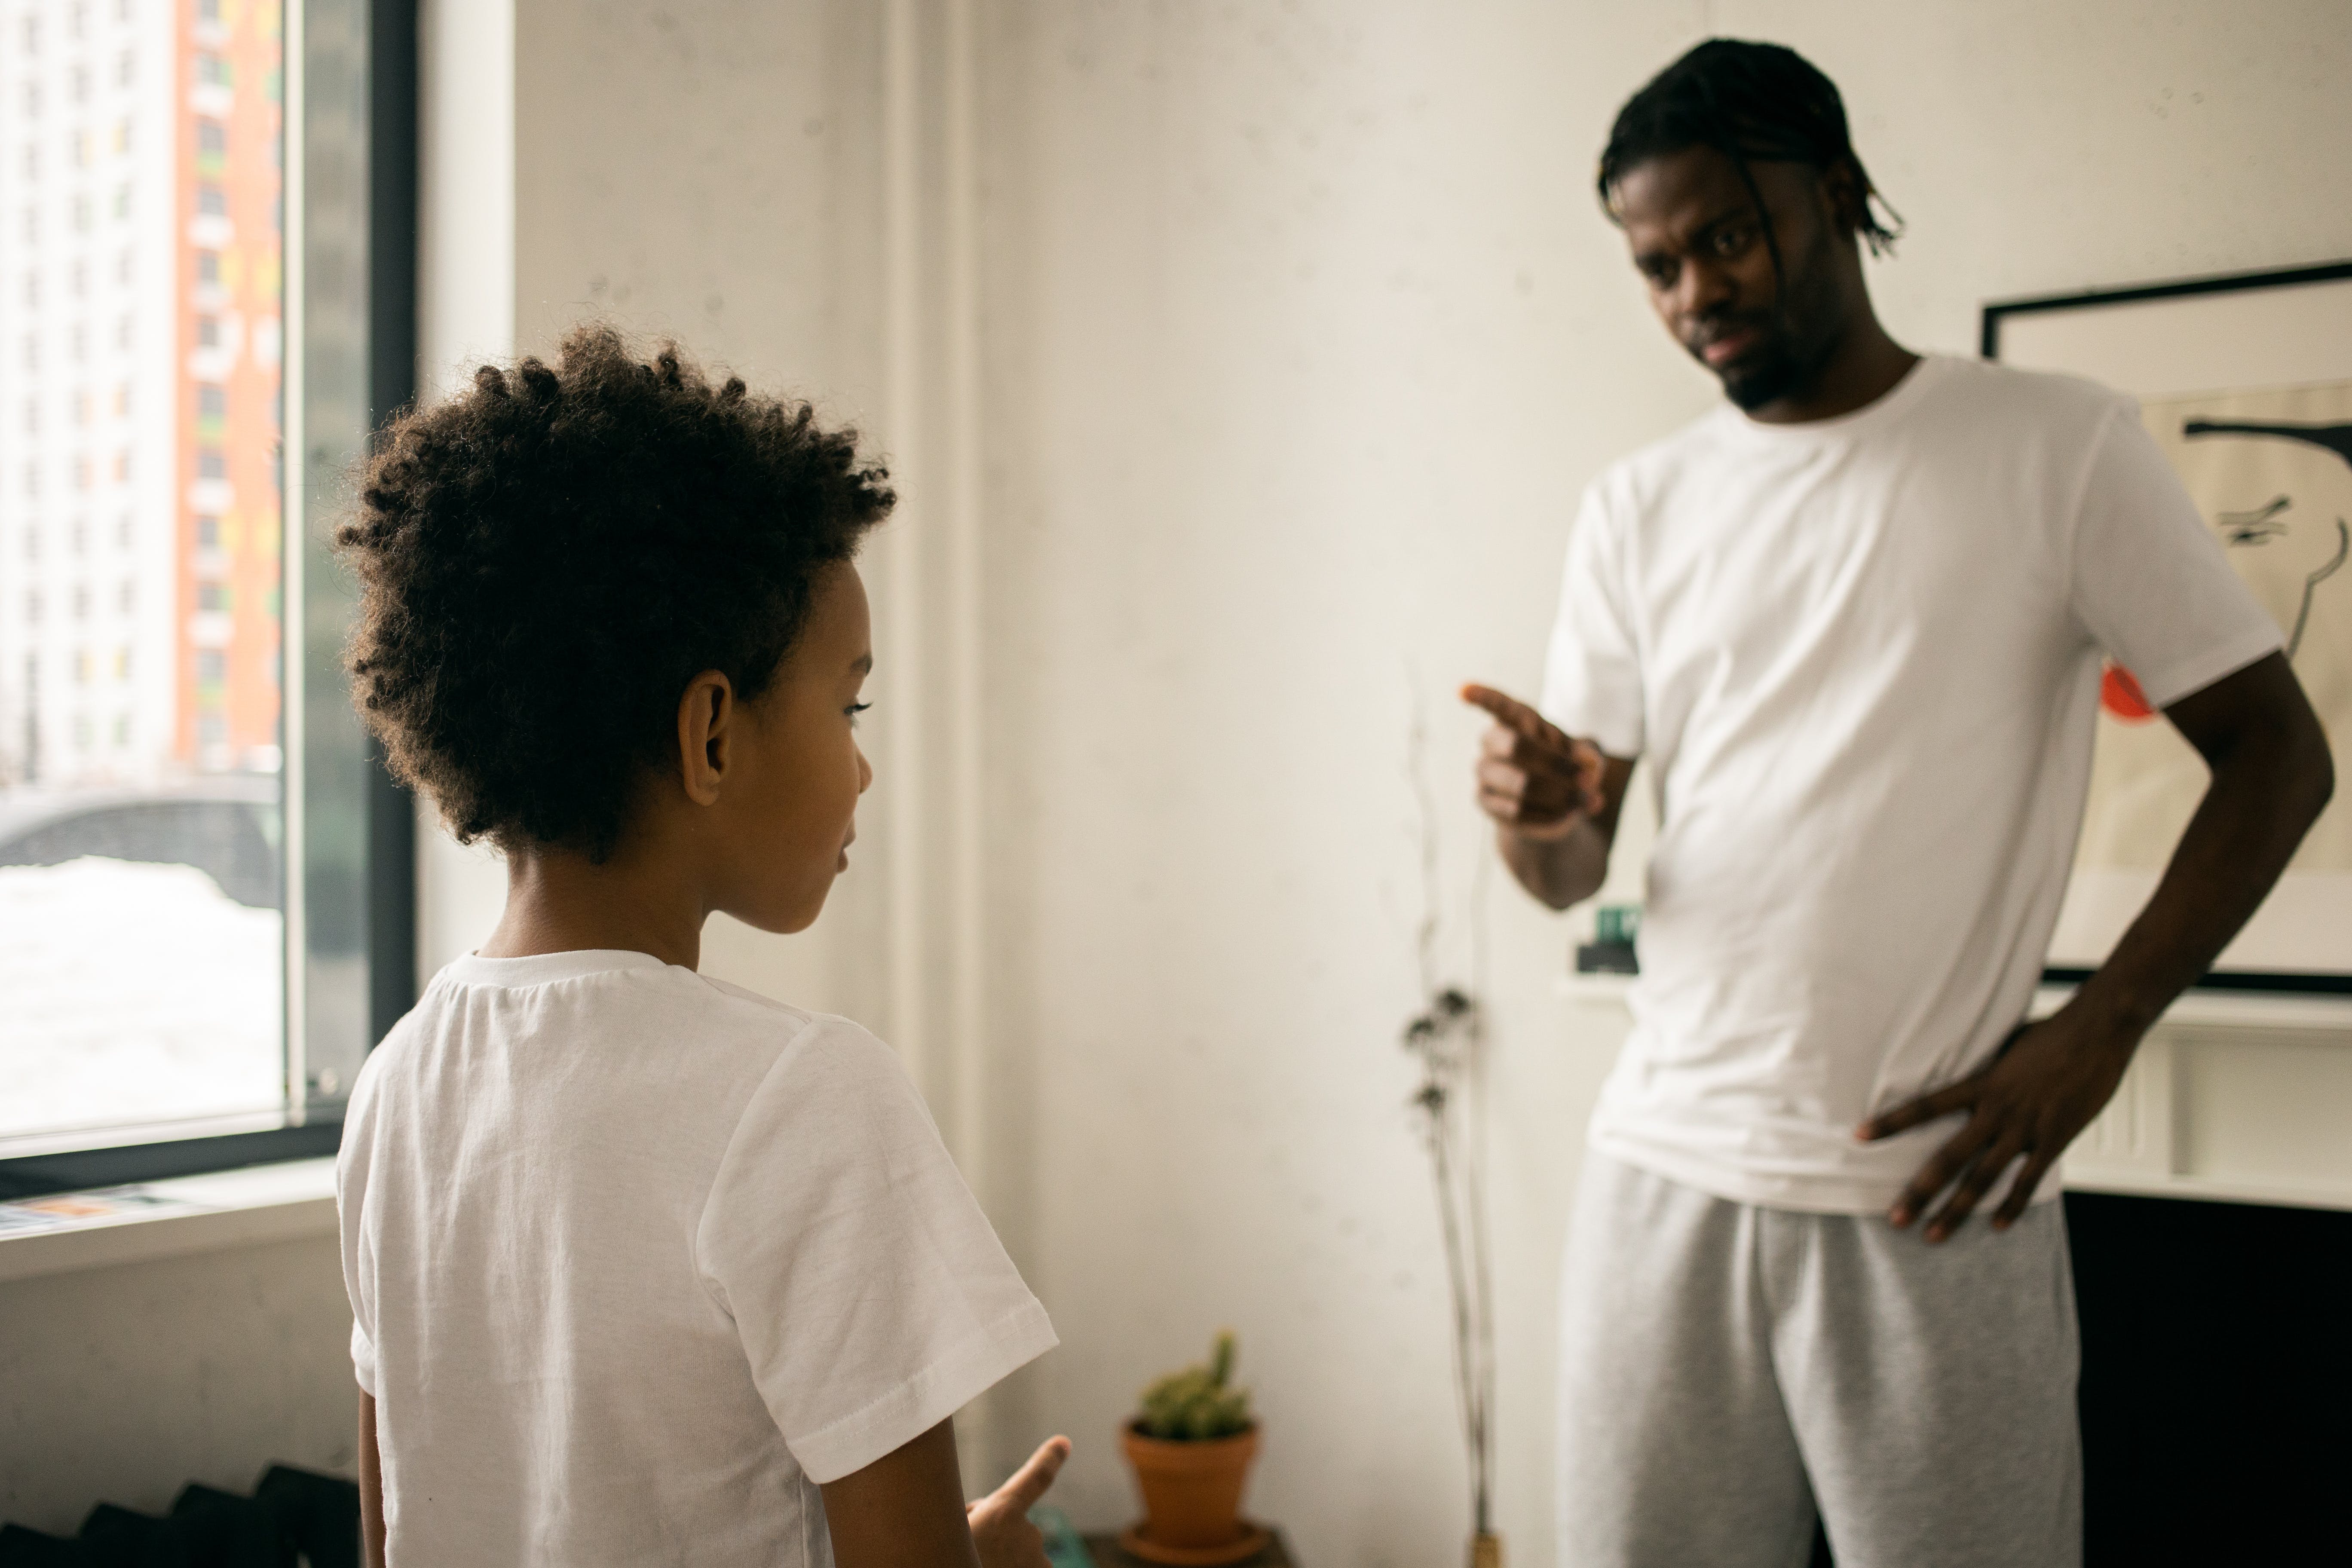 A little boy being scolded by his father | Source: Pexels